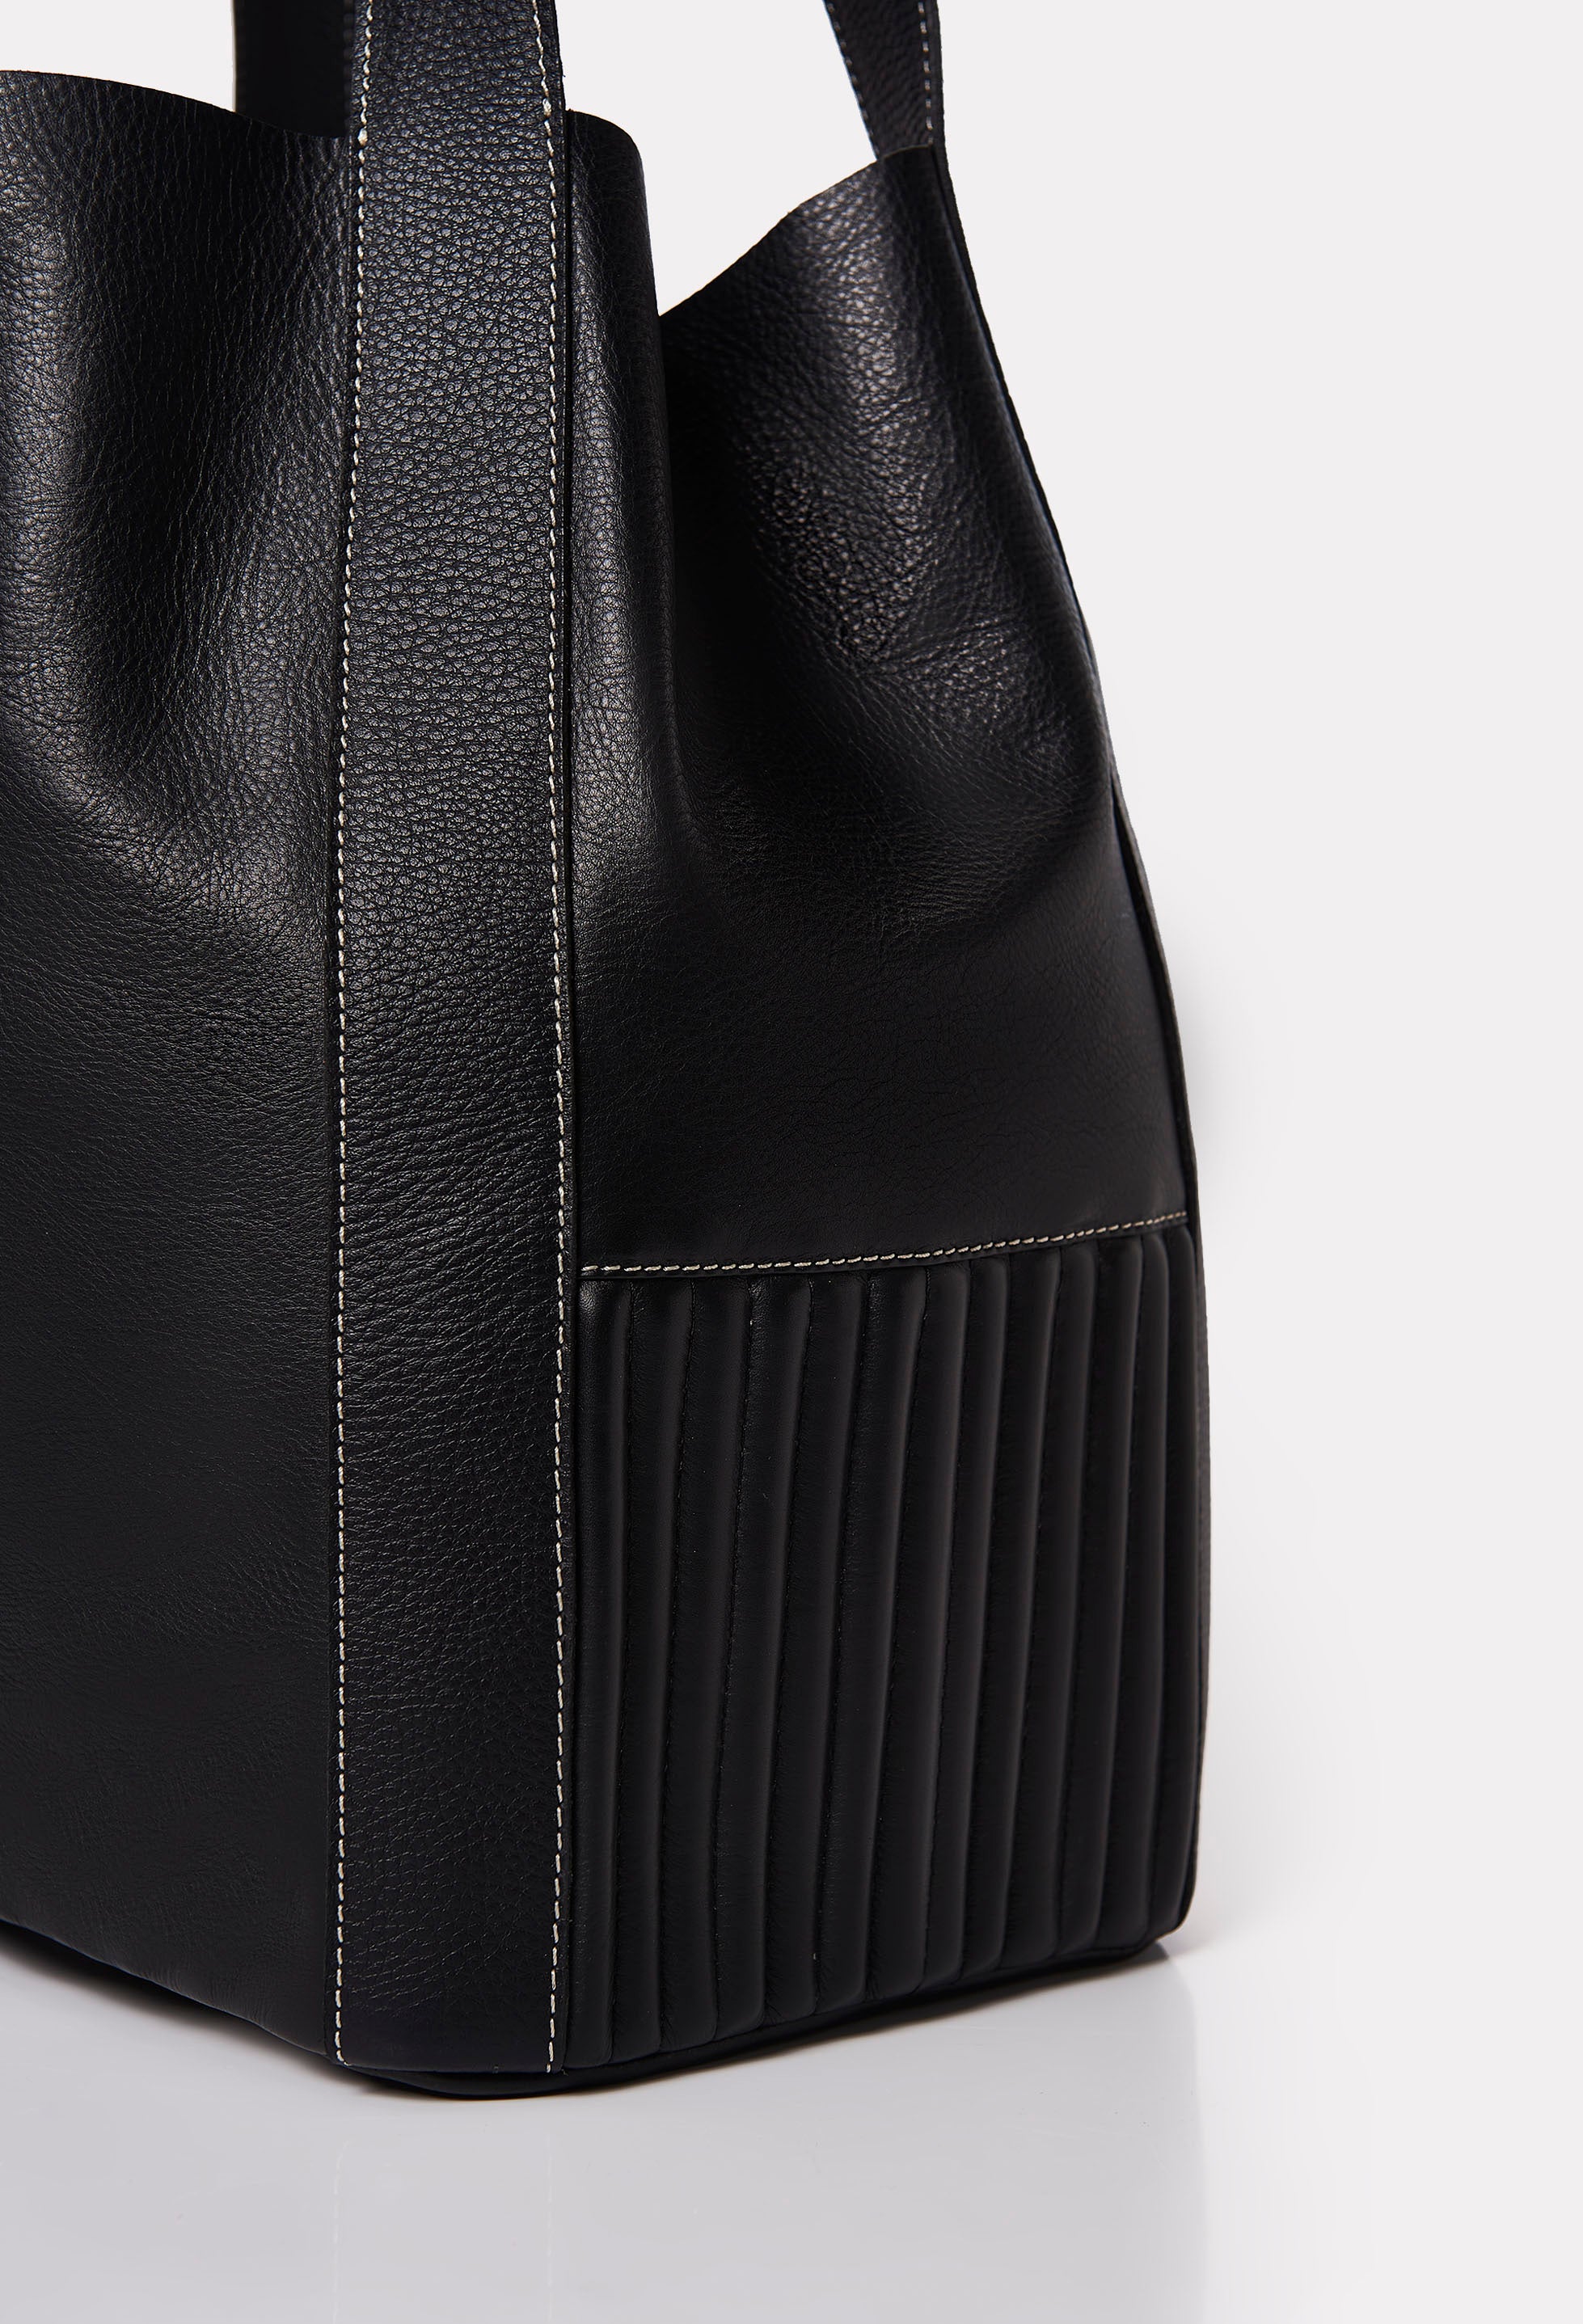 Partial photo of a Black Leather Bucket Bag Ushuaia with needlework on the sides and contrast stitching highlights.